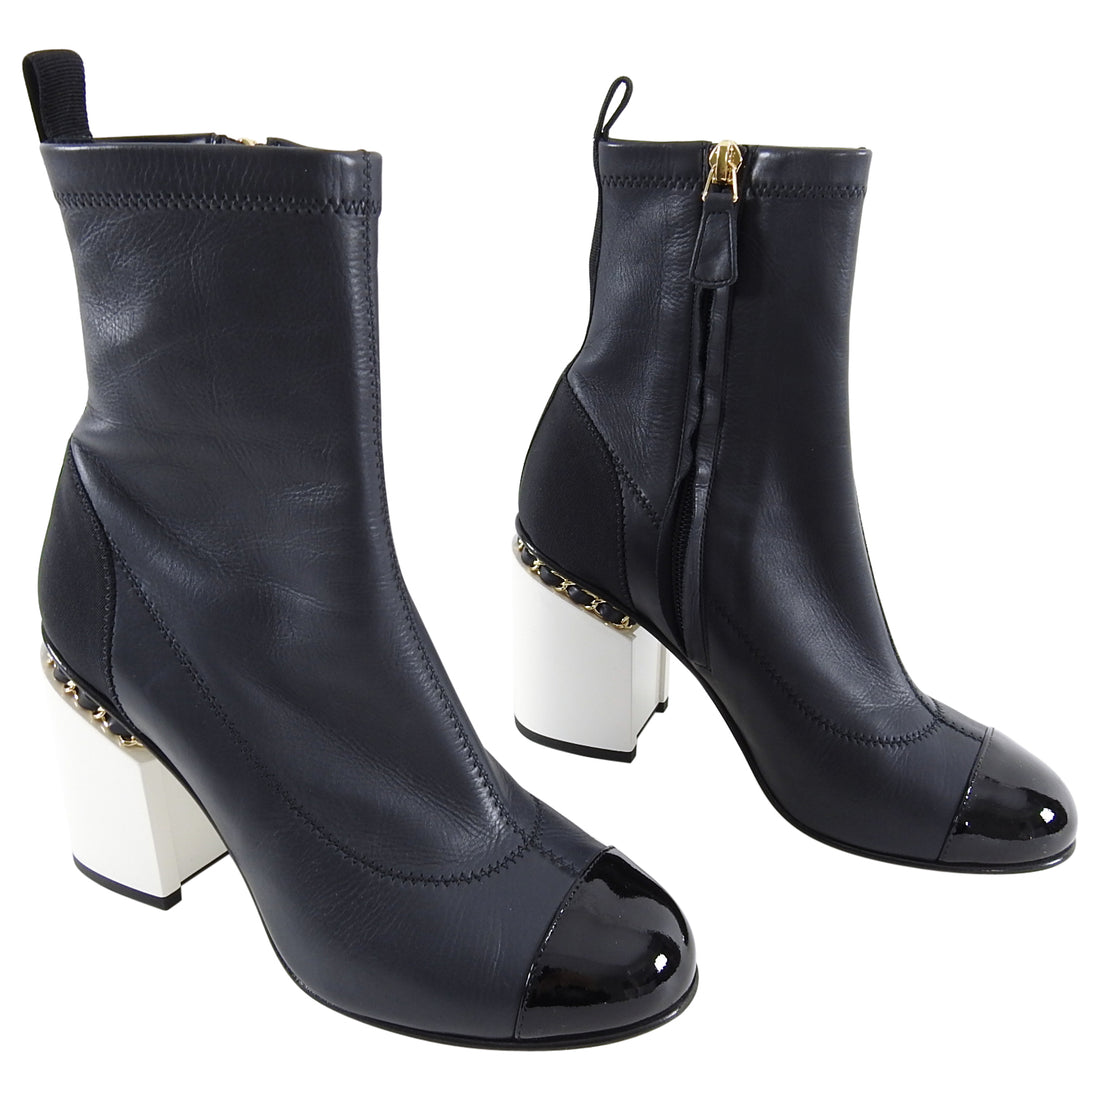 Luxury Beauty  Outfit  Adoro questi stivali chanel boots shoeslover   Facebook